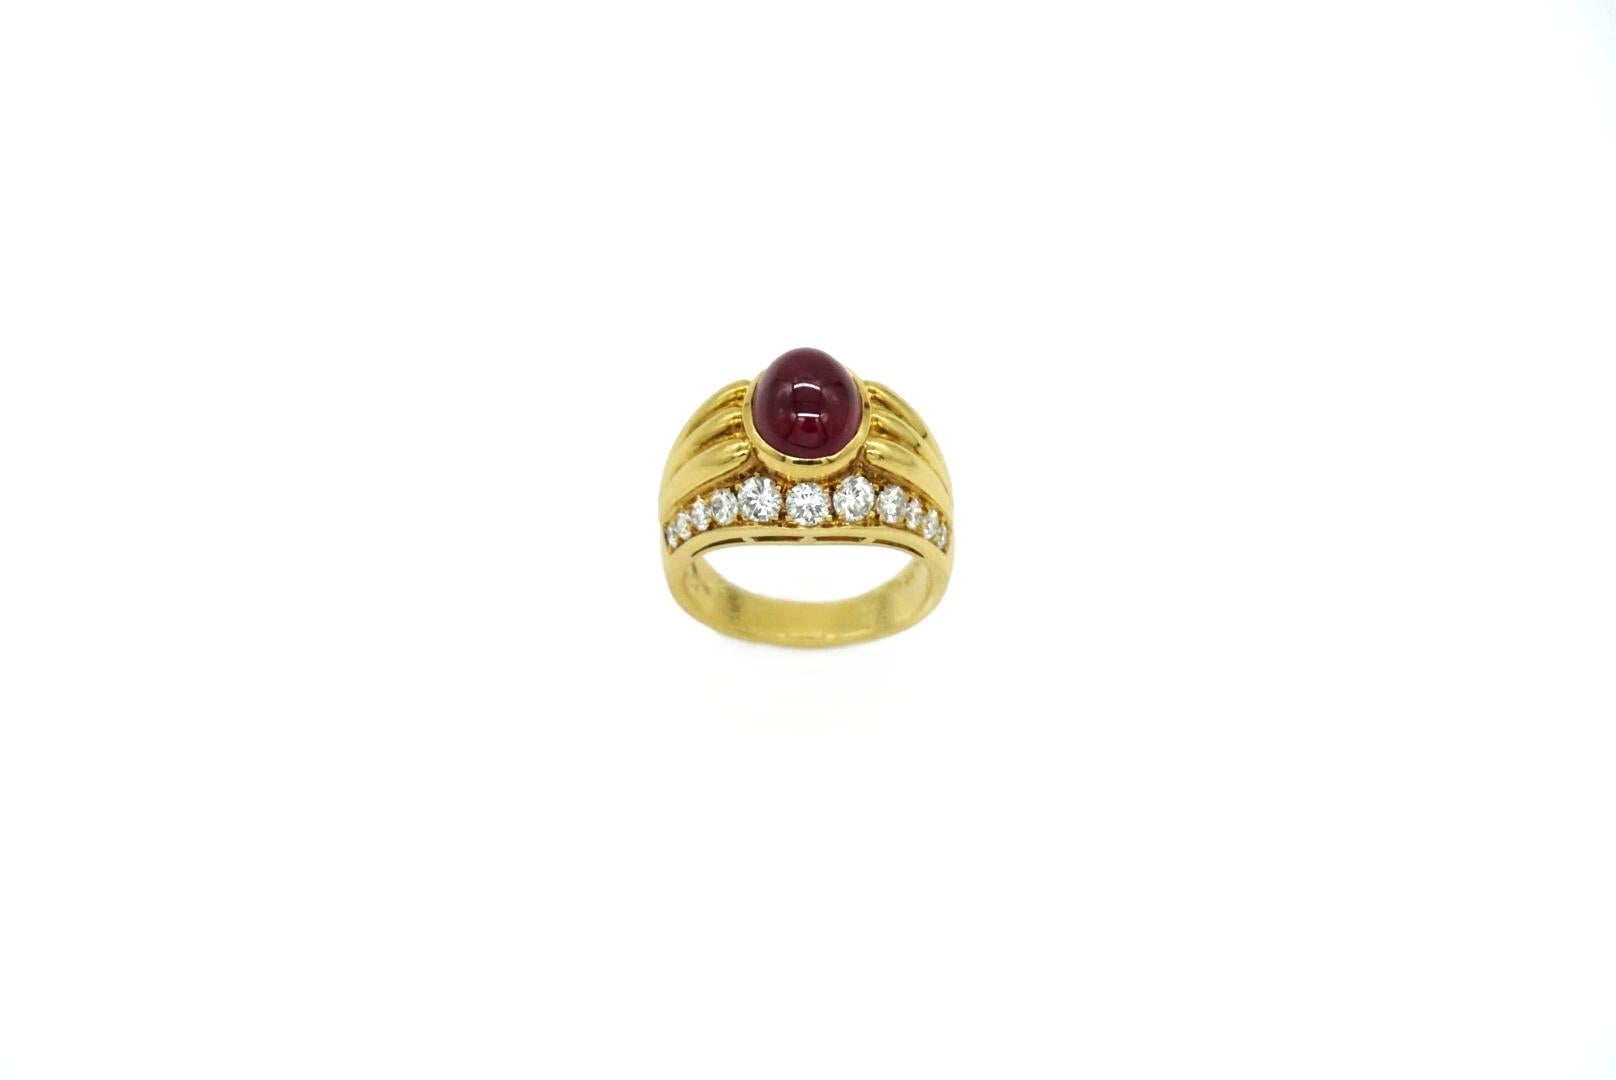 Bulgari 18 karat yellow gold ring with a 4.05 carat cabochon ruby and round brilliant diamonds. Made in Italy, circa 1980.